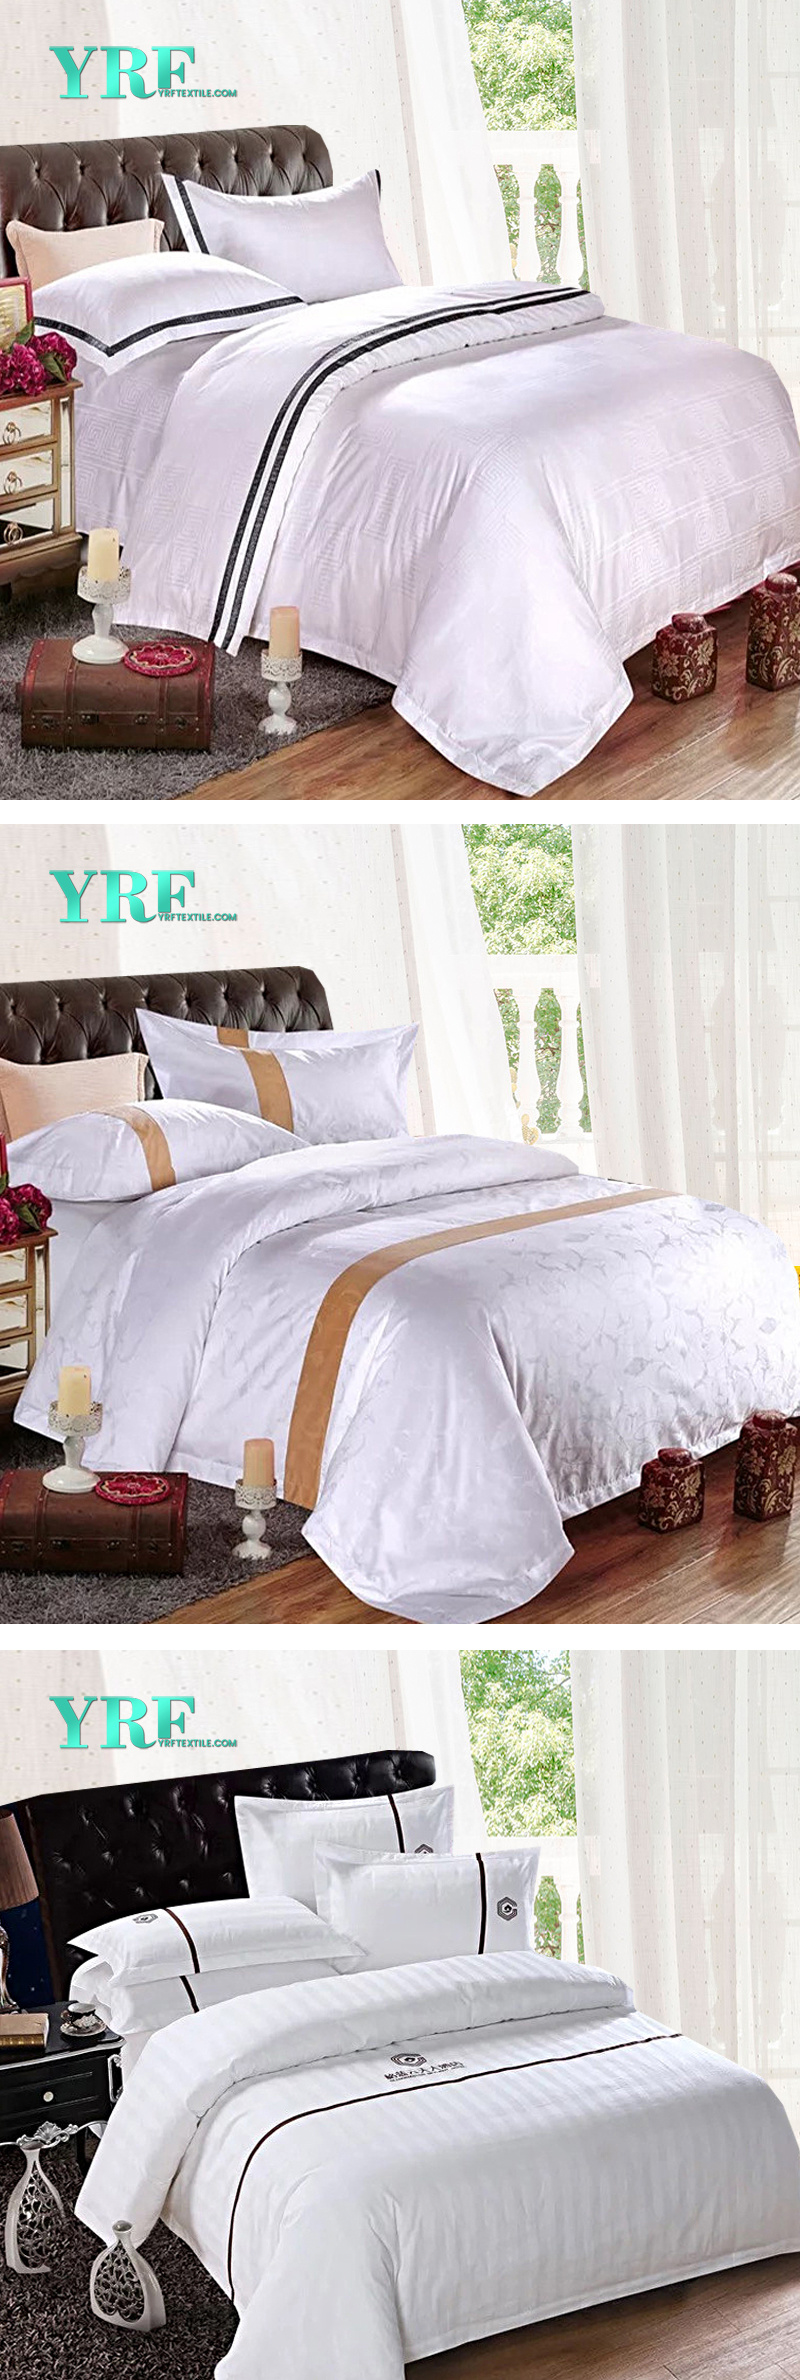 Yrf Cotton White Bed Sheet Satin Flat Sheet Fitted Sheet Single Size Duvet Cover